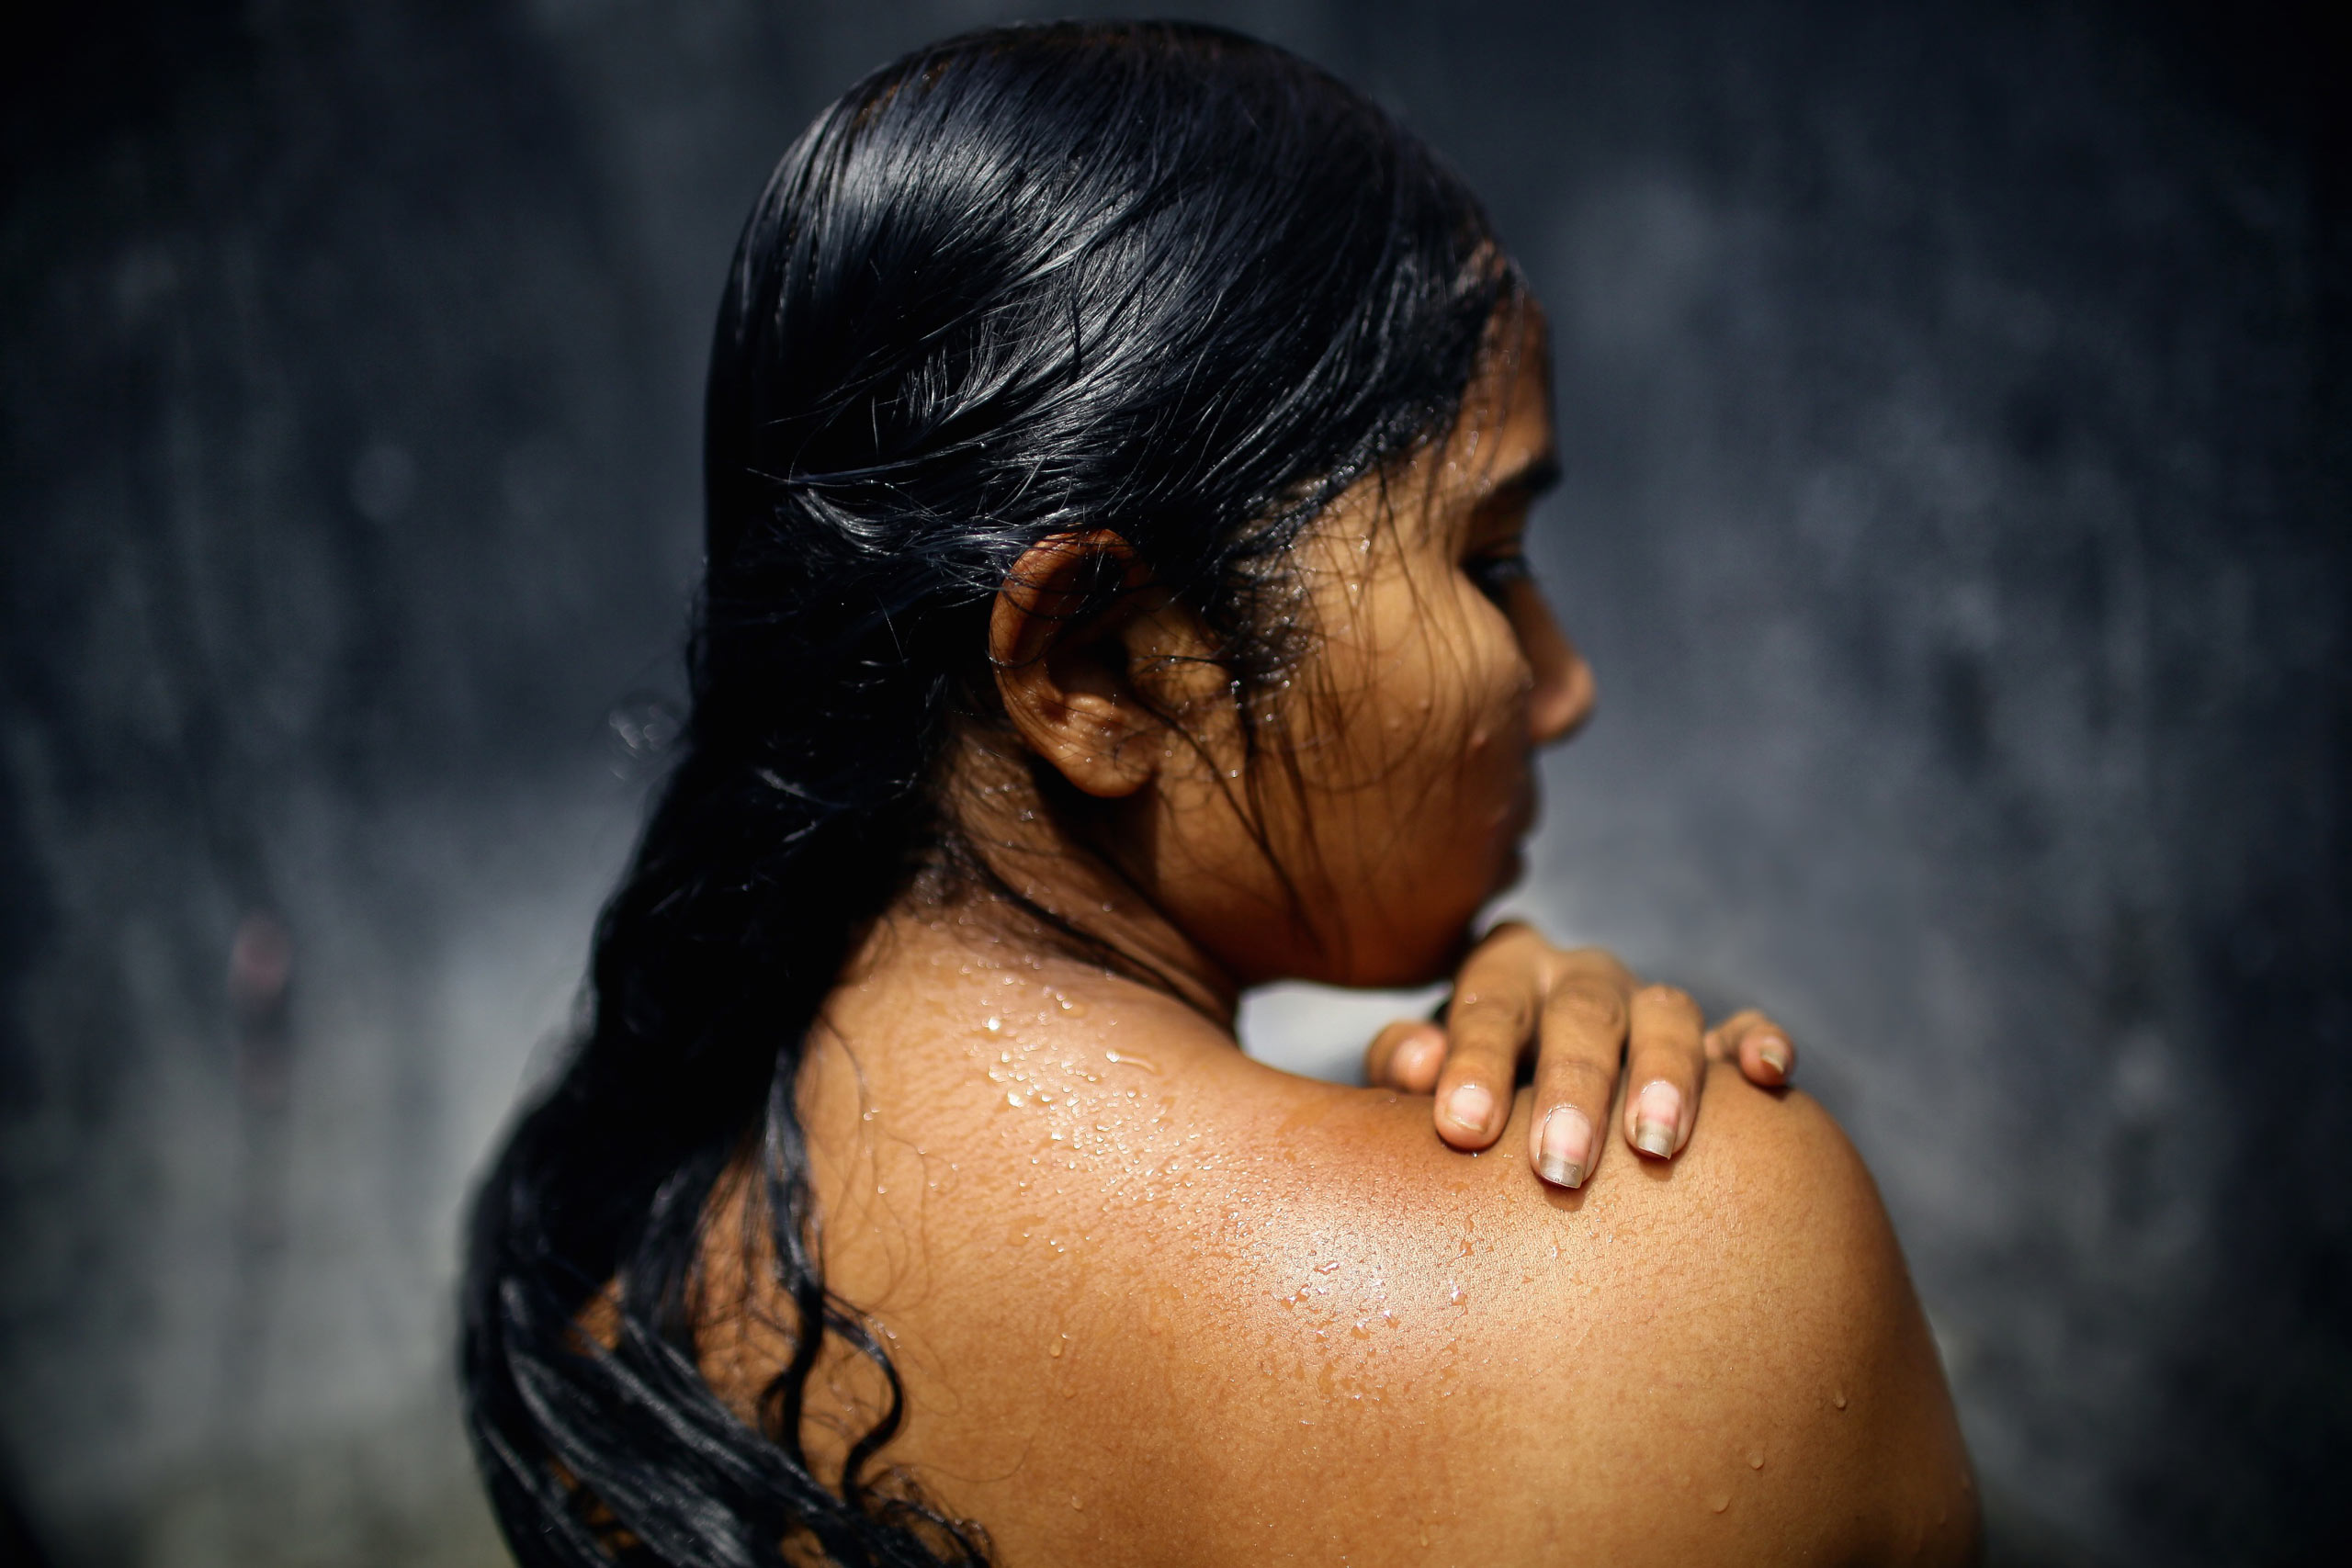 Beauty showers three times a day in between servicing clients. She is one of the underage minorities in the area, educated in the sexual health risks of working in Sonagachi, India. Nonetheless, she regularly attends four to five clients in between every shower.